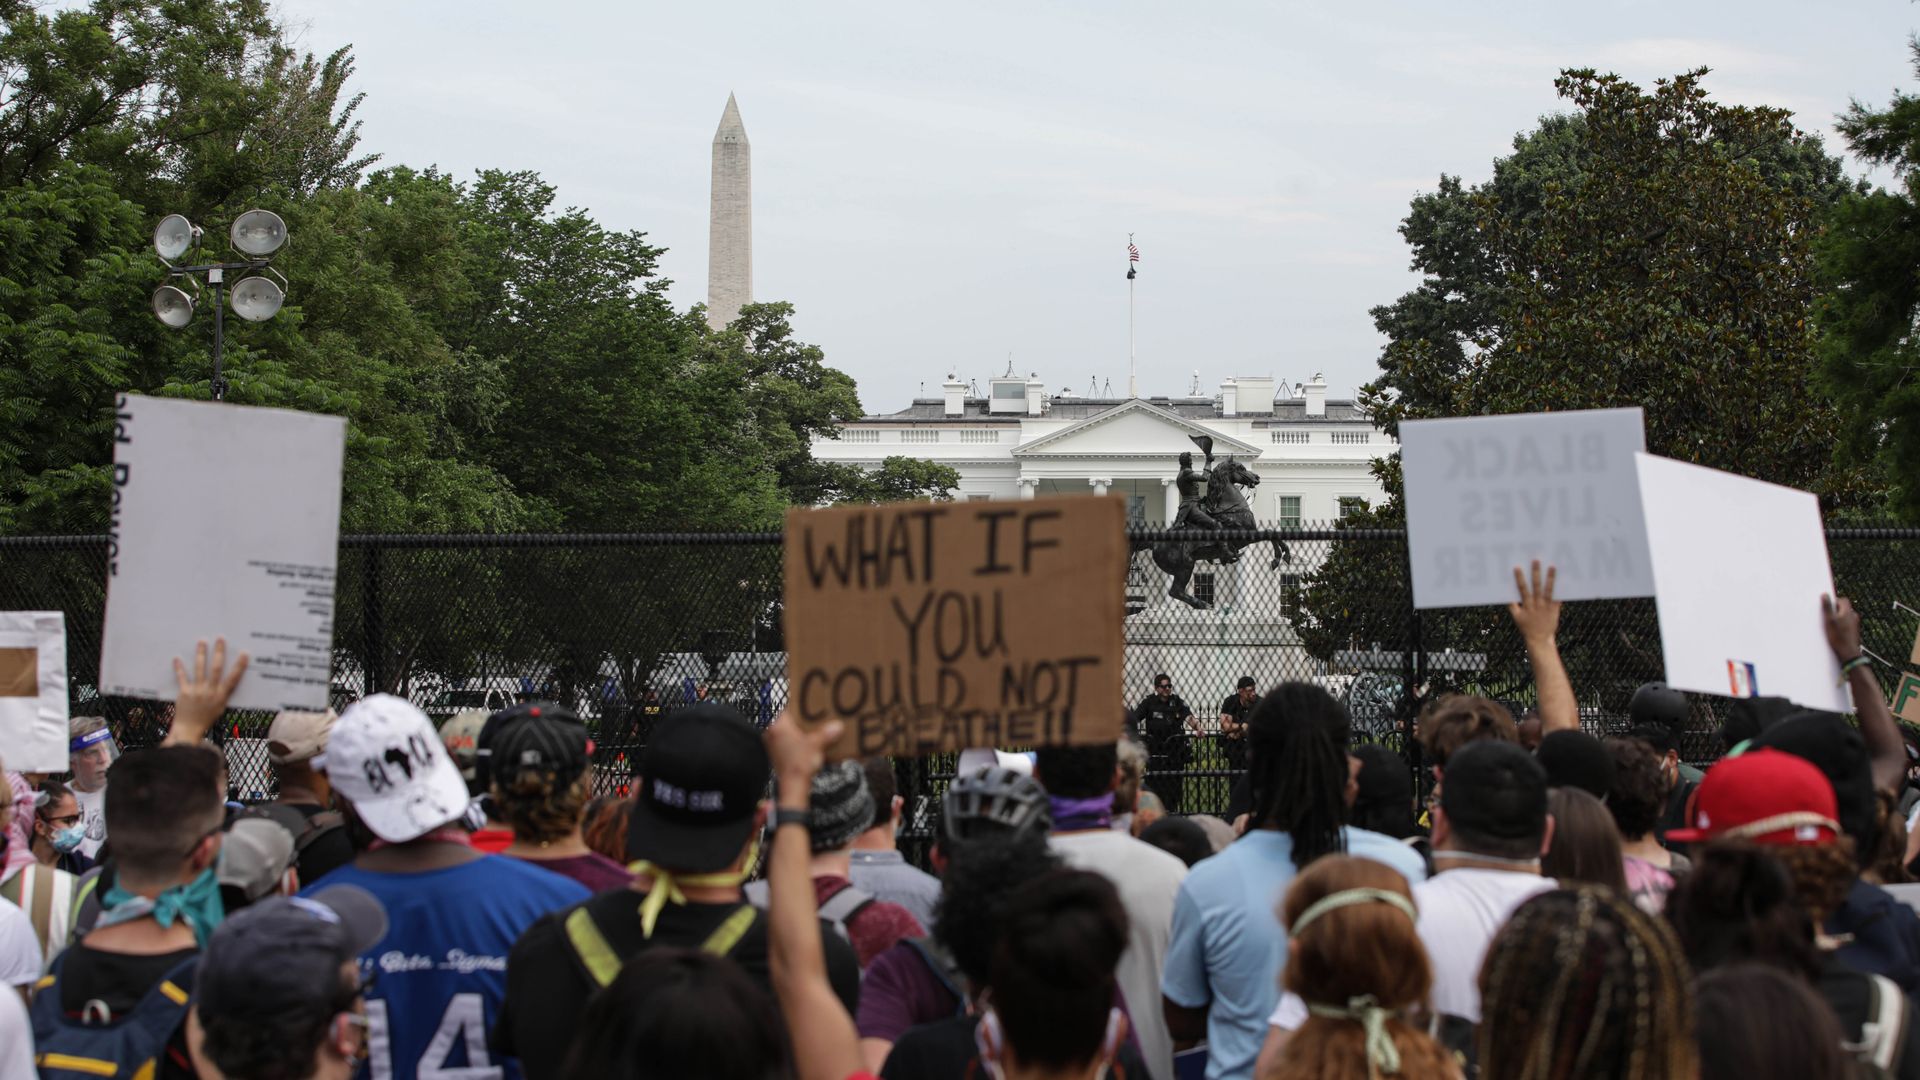 Protesters in front of White House